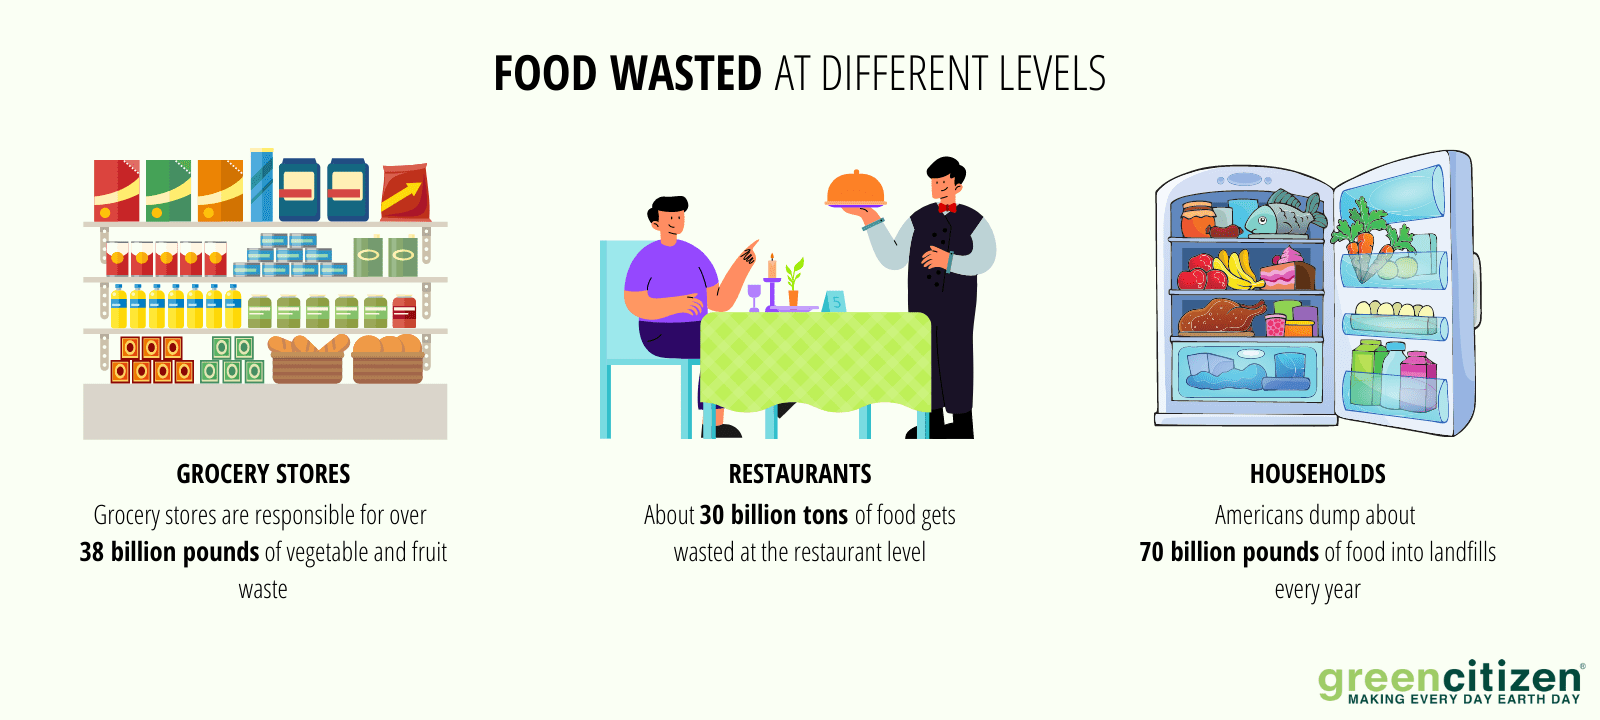 Food waste at different levels